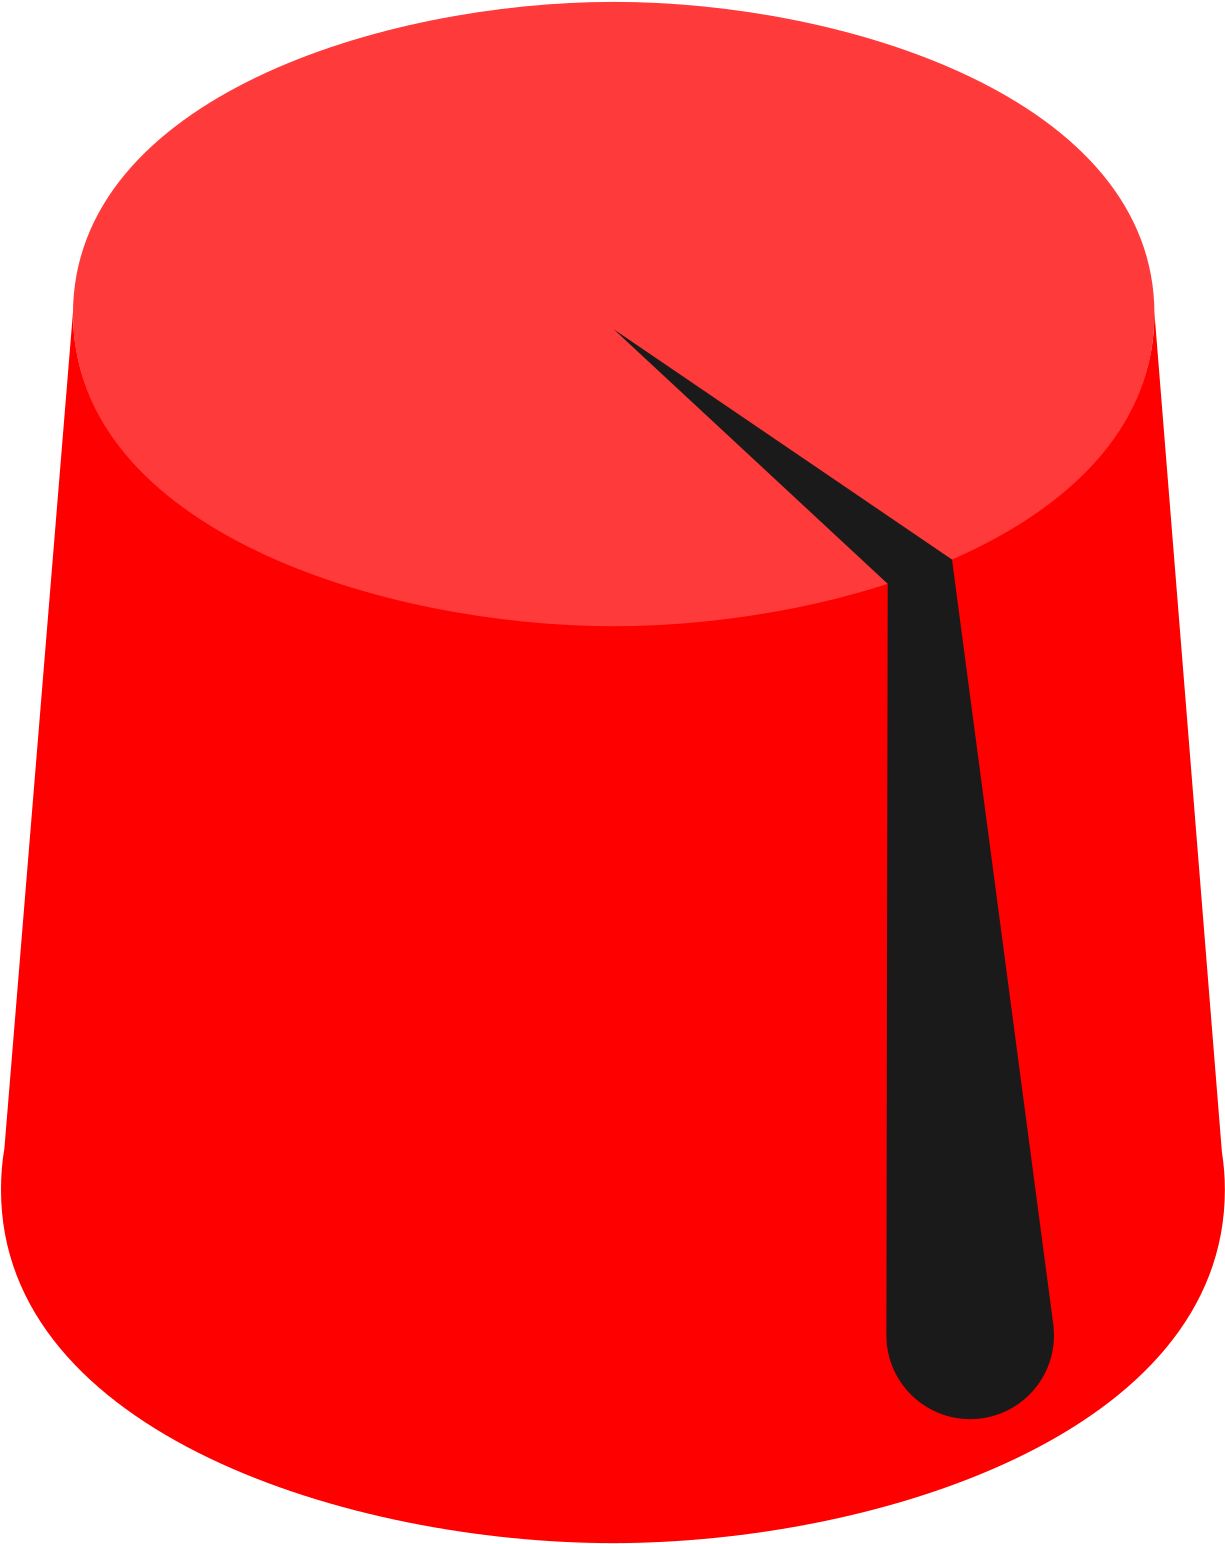 A Red Cylinder With A Black Stick